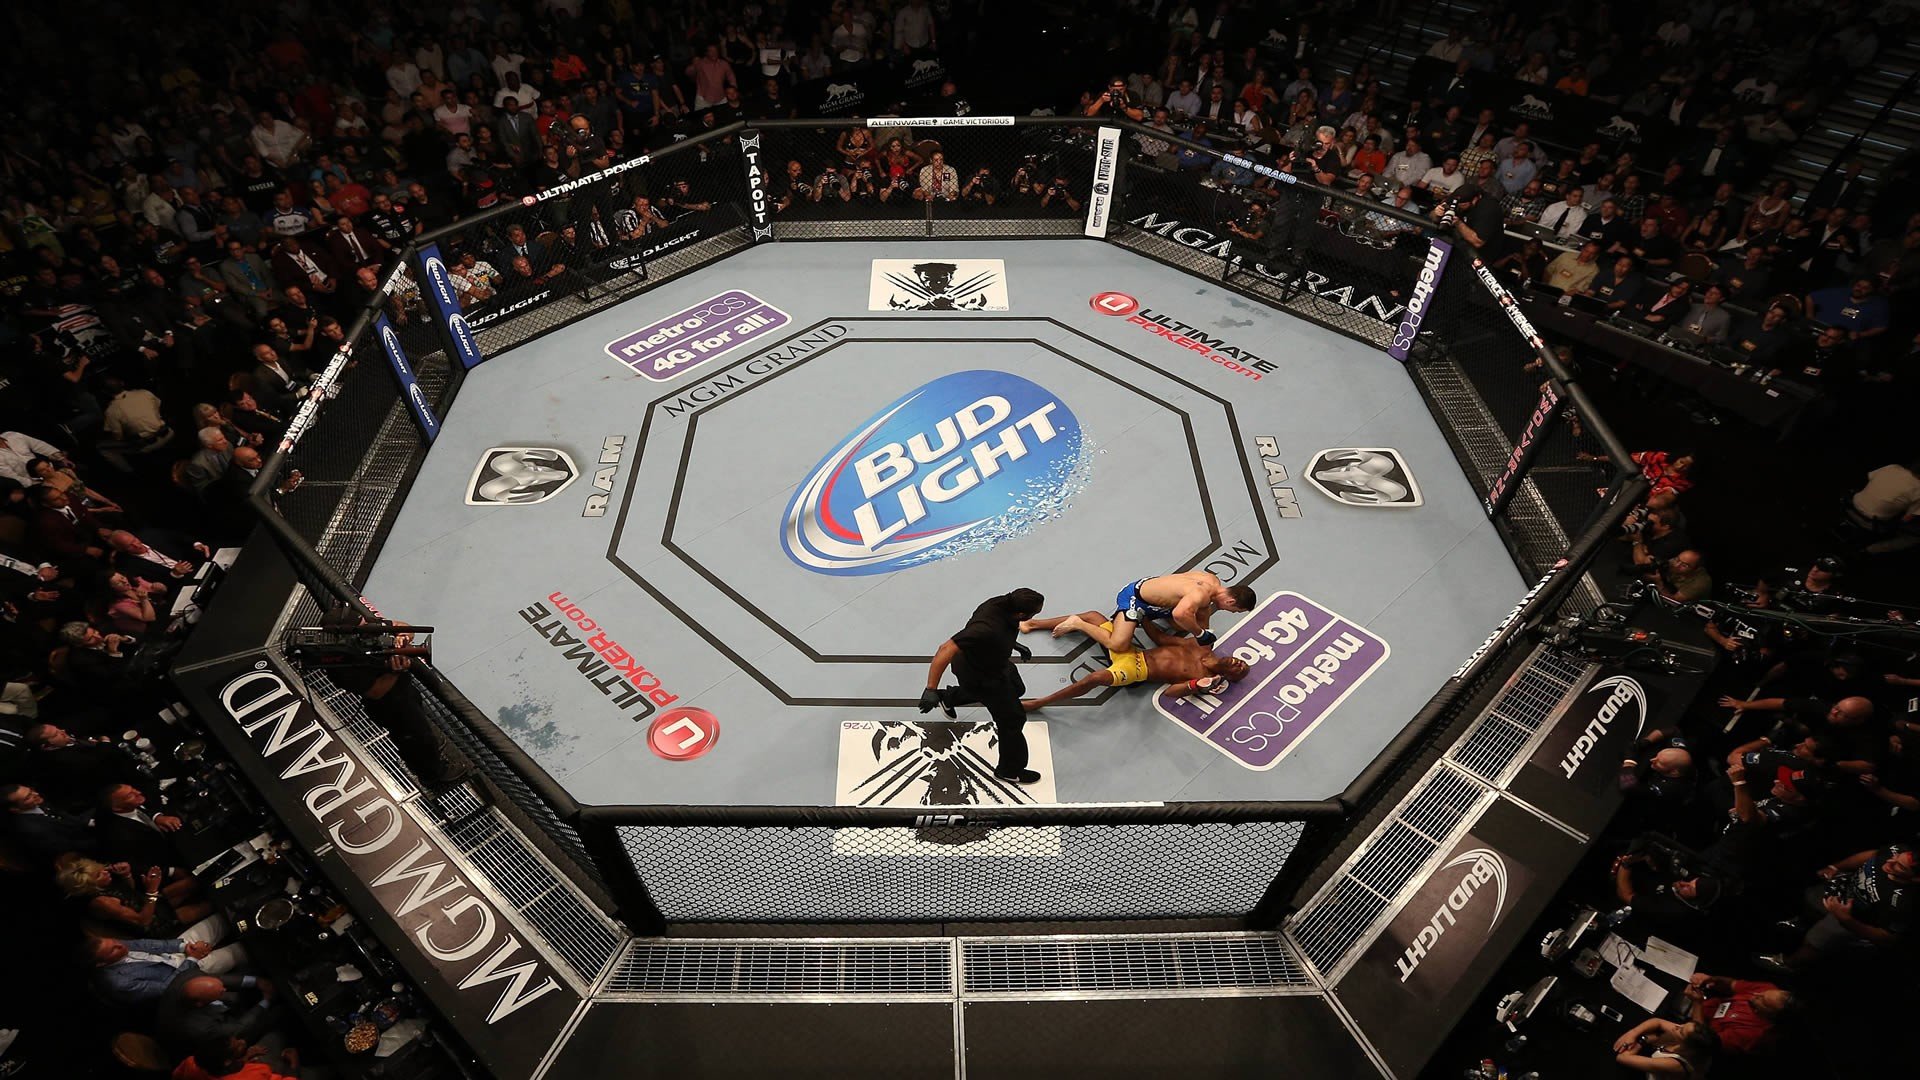 Ontario regulator reinstates betting on UFC after promotion updates its policies and procedures